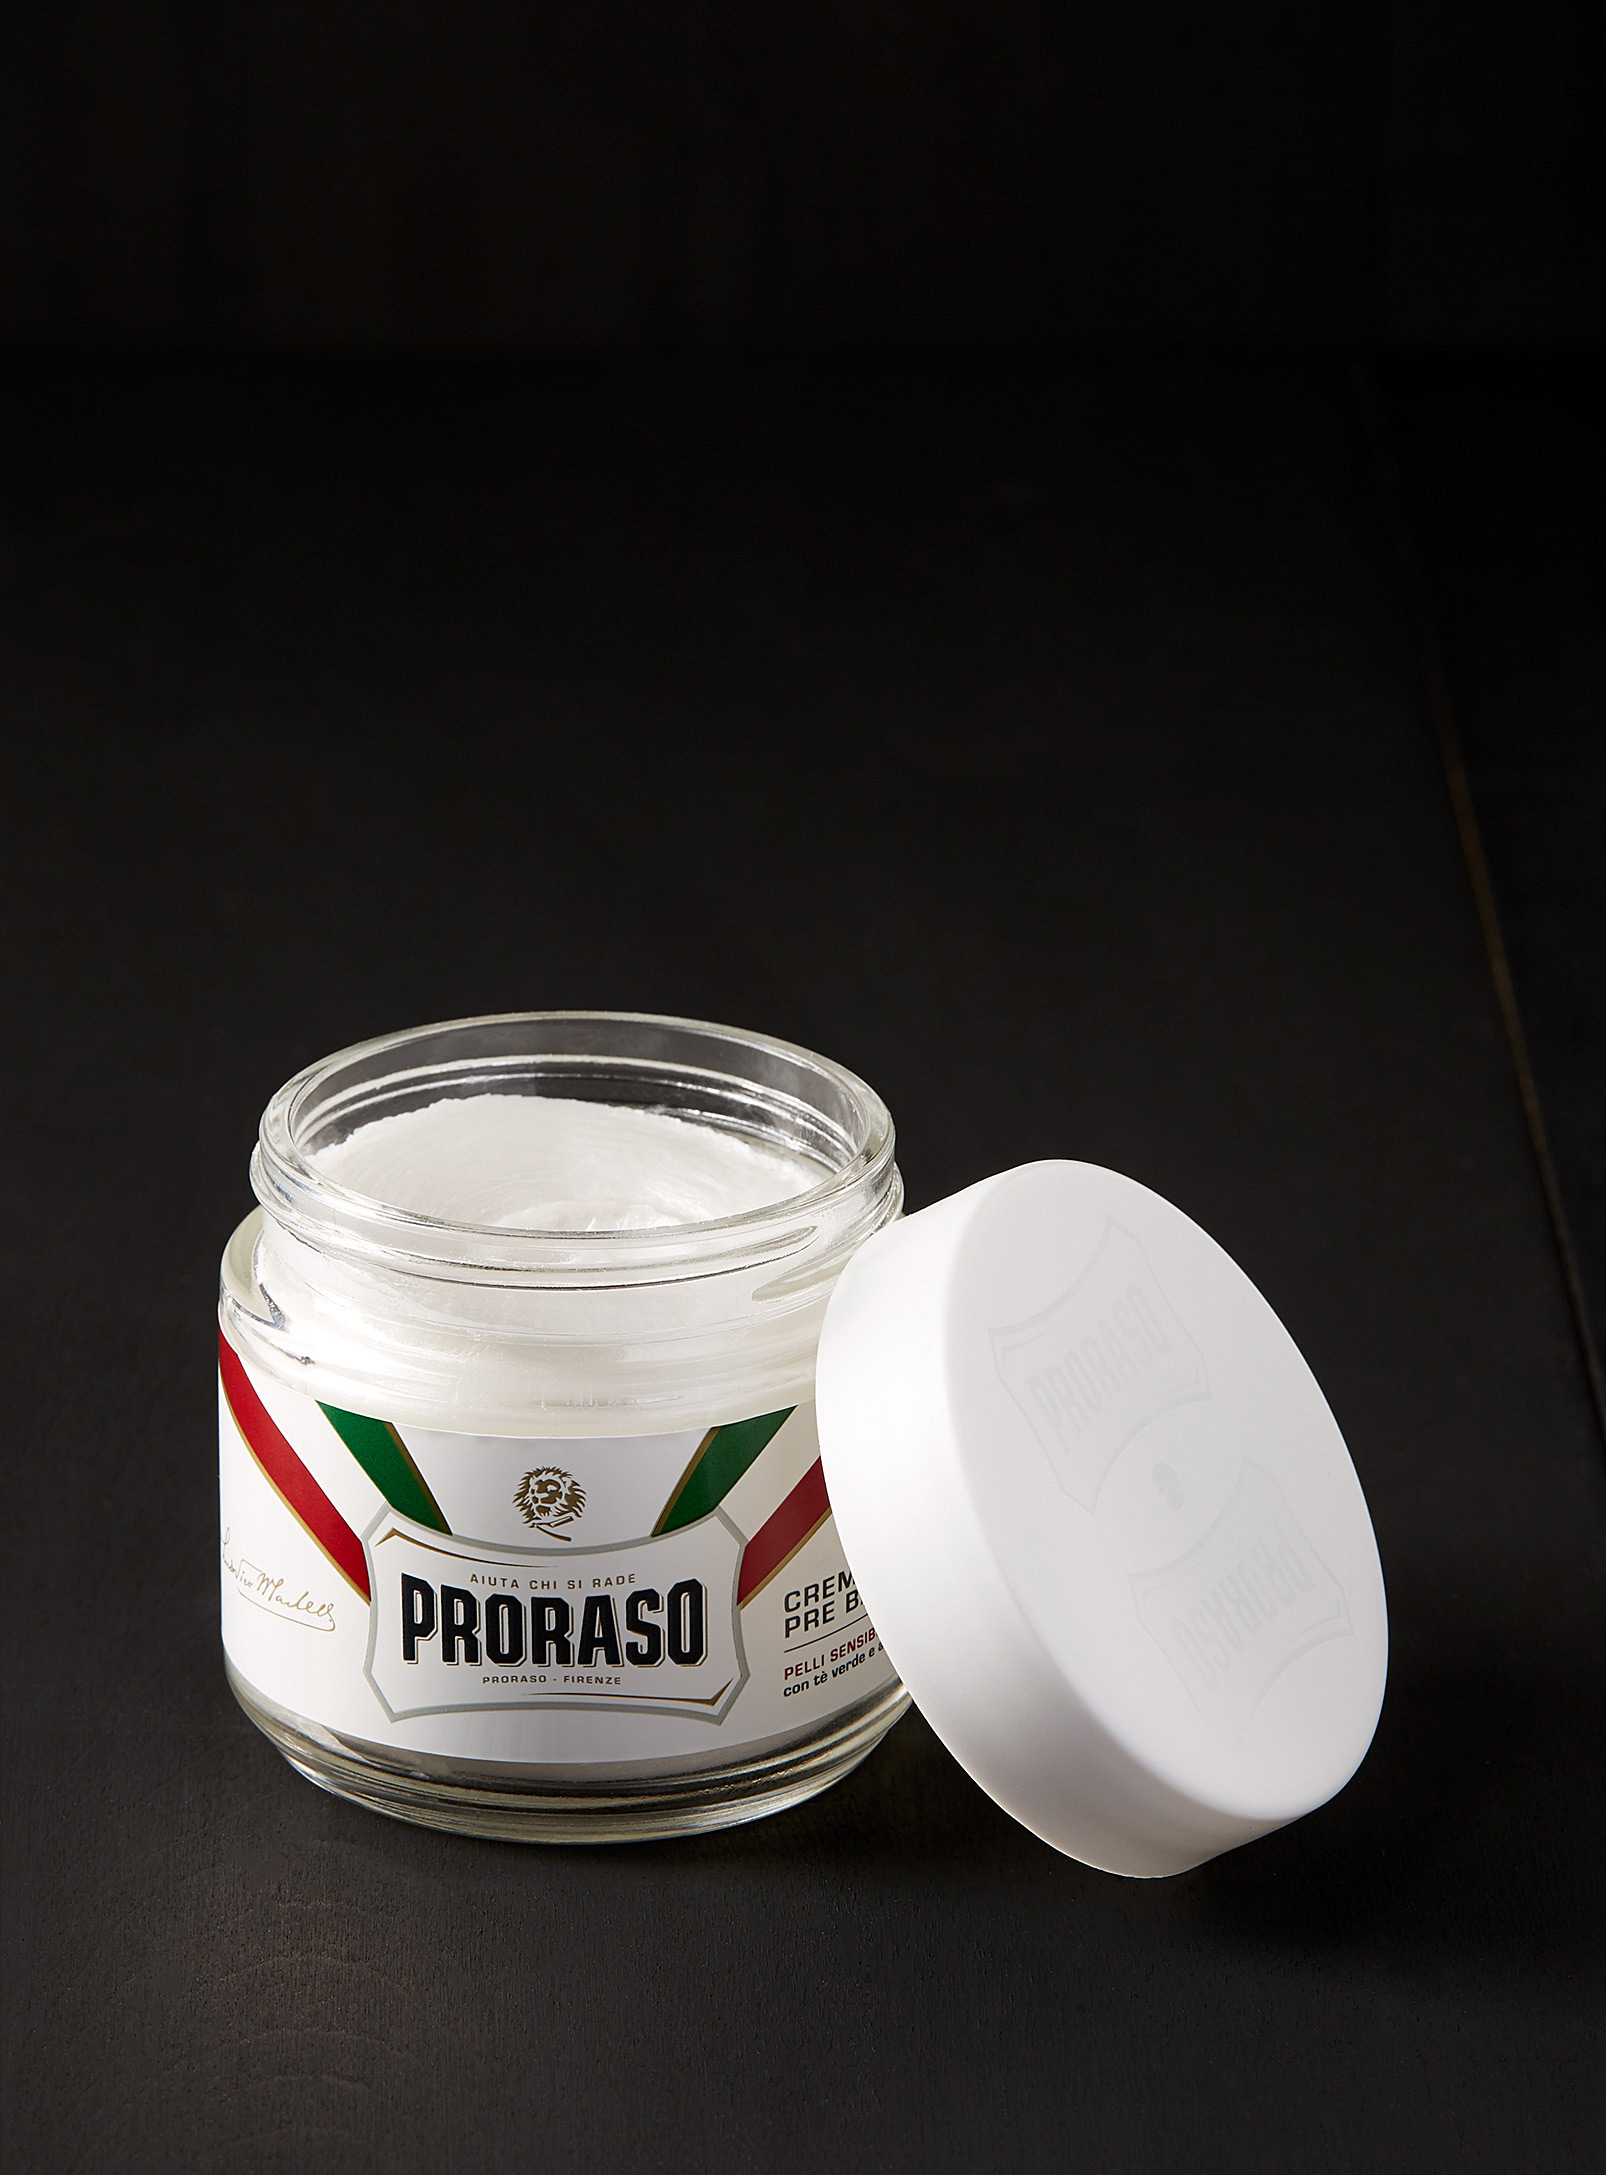 Proraso Green Tea And Oatmeal Before/after Shave Cream In Assorted